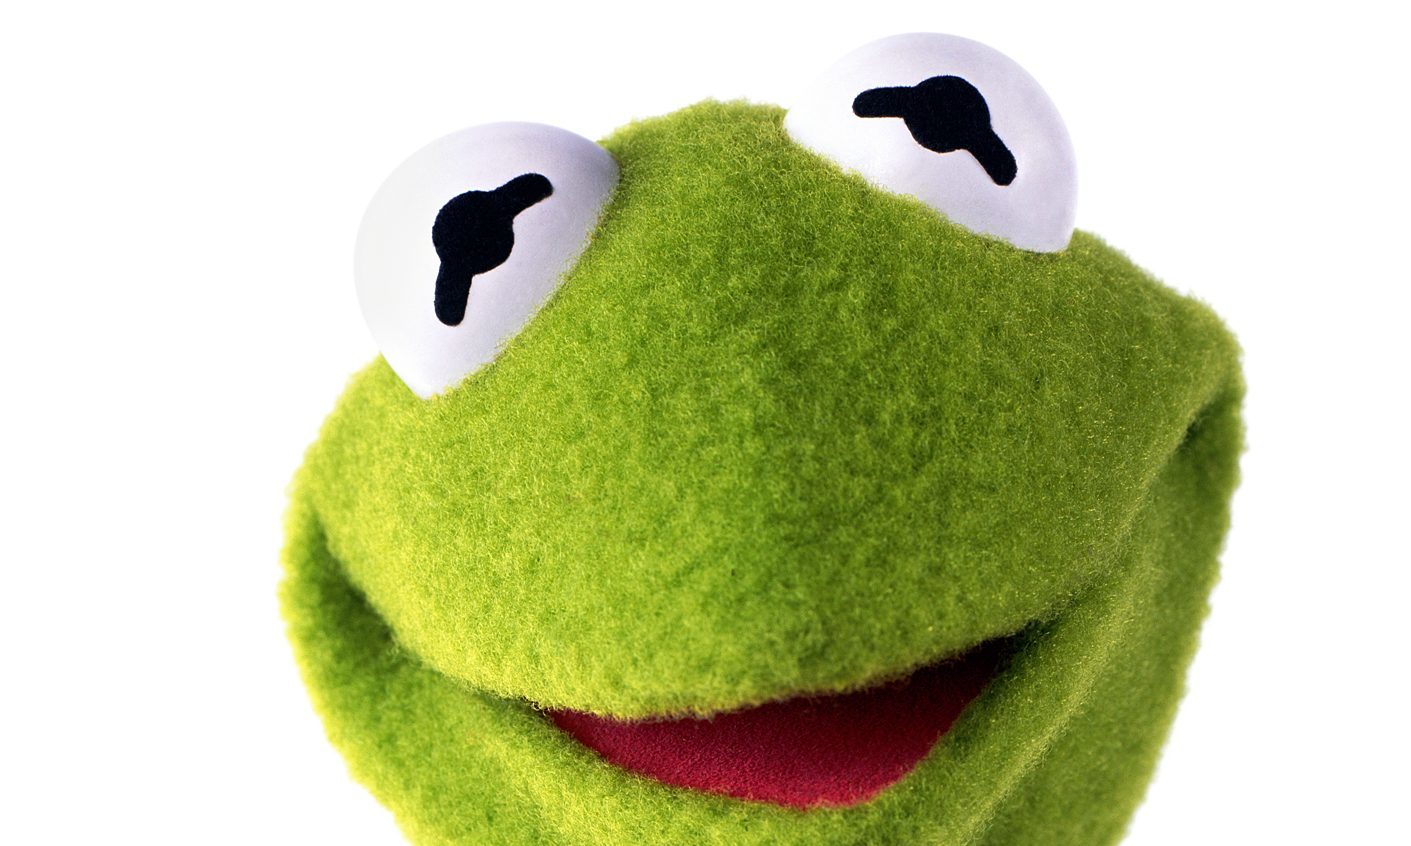 The lighthearted campaign argues that Kermit should be immortalised in Dundee